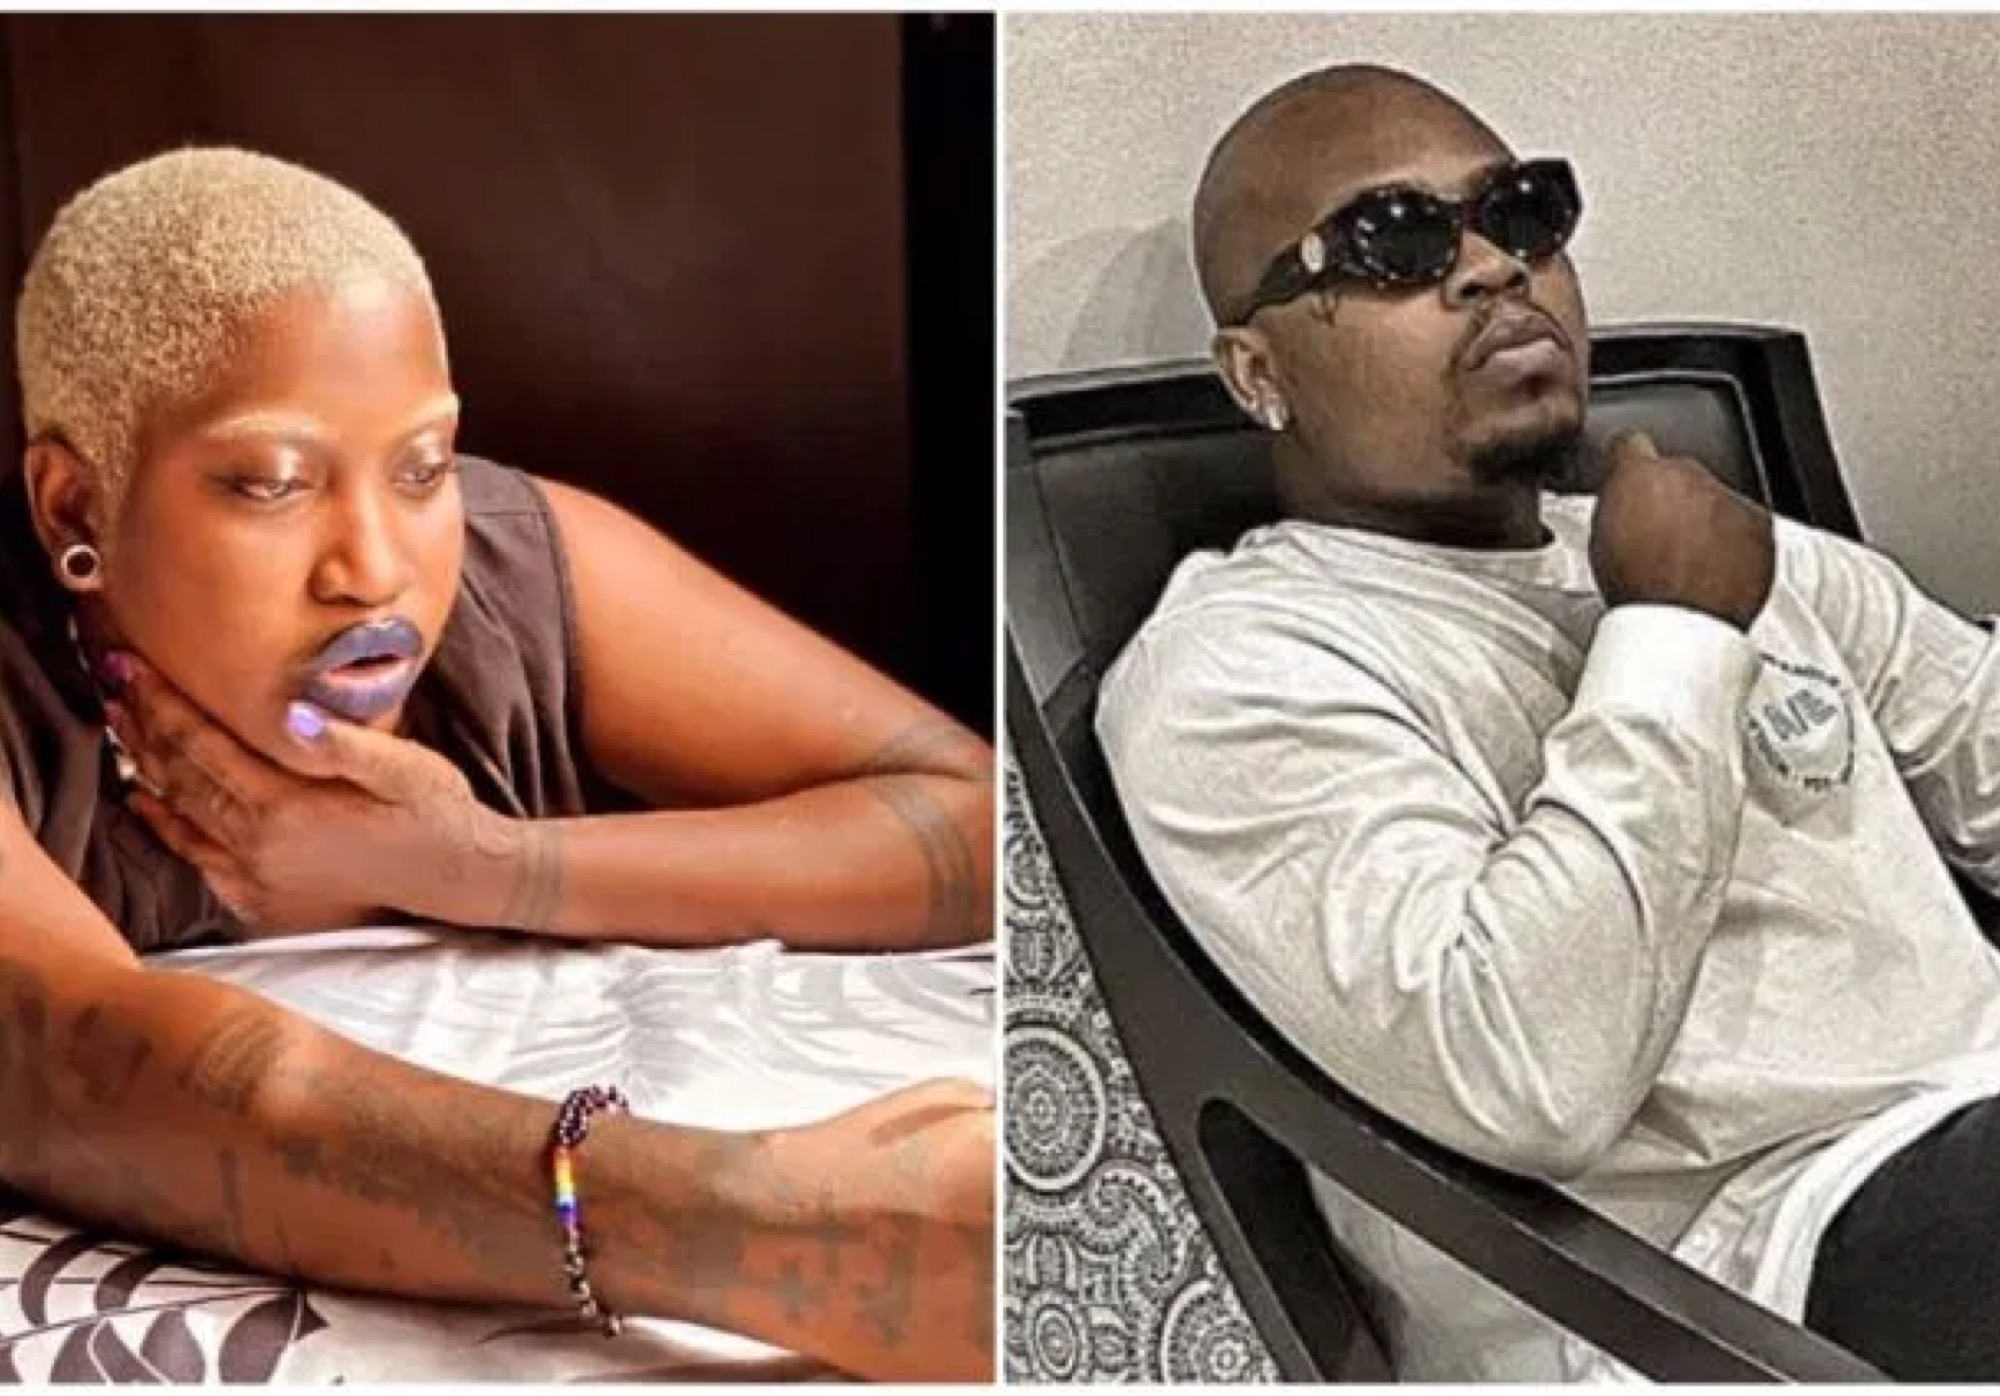 Singer Temmie Ovwasa Calls Out Former Record Label Boss, Olamide